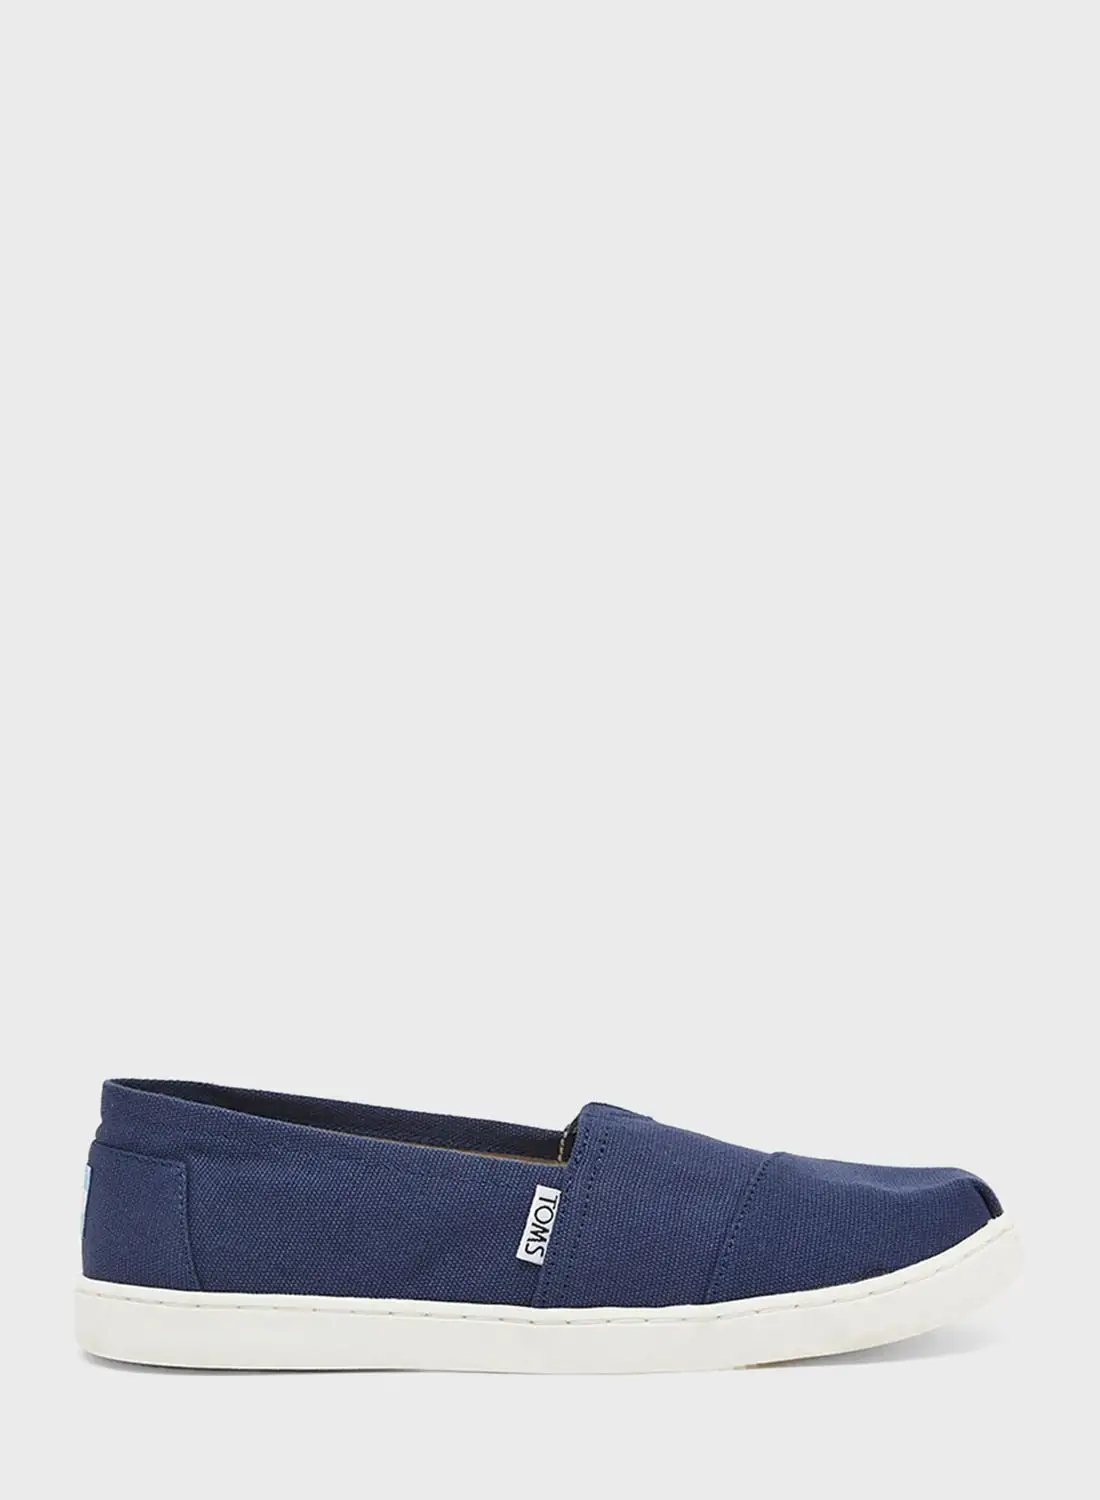 TOMS Kids Classic Slip-Ons Loafers